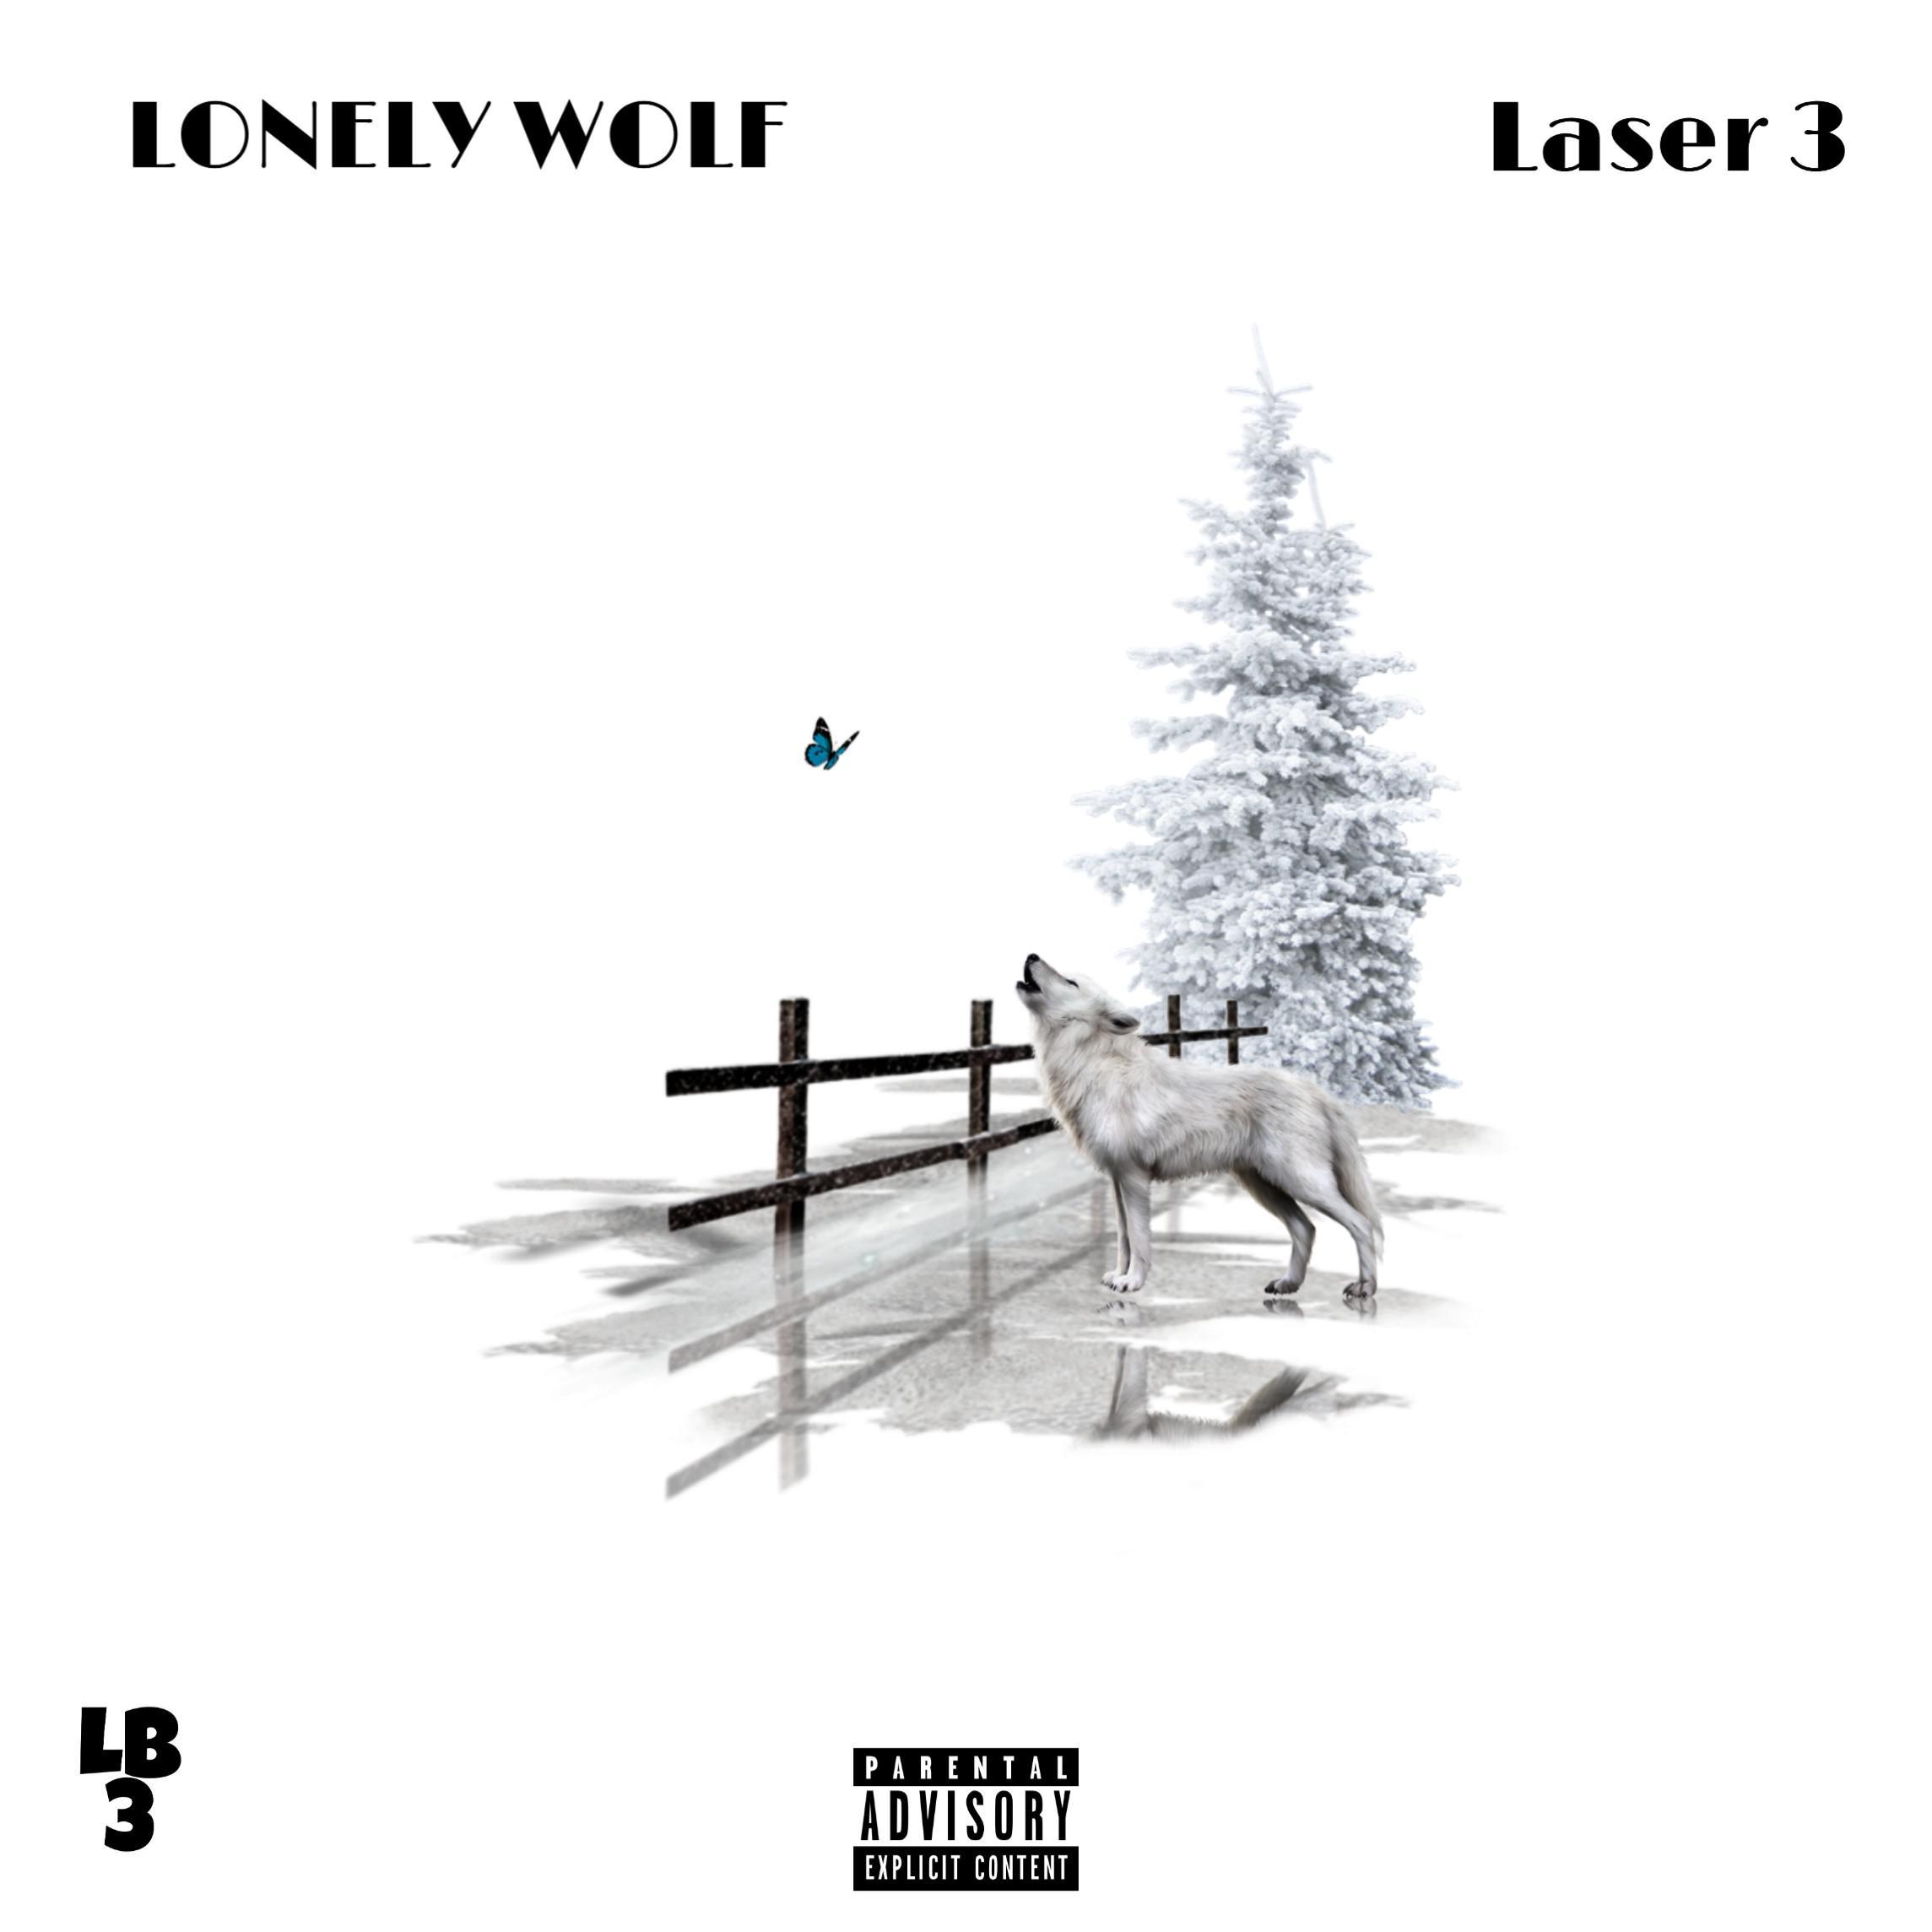 LB3 - LONELY WOLF